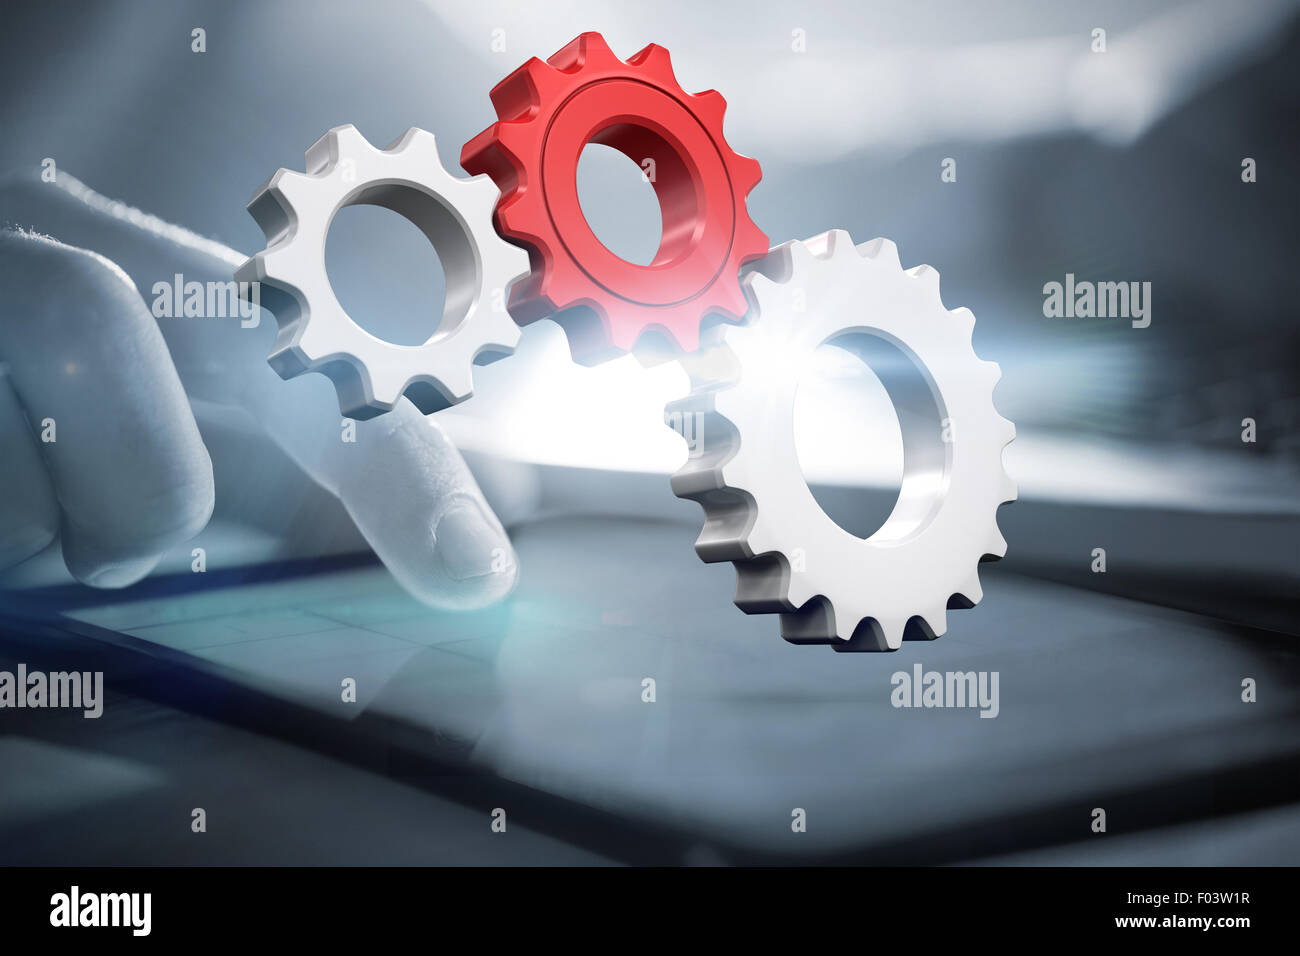 Composite image of white and red cogs and wheels Stock Photo